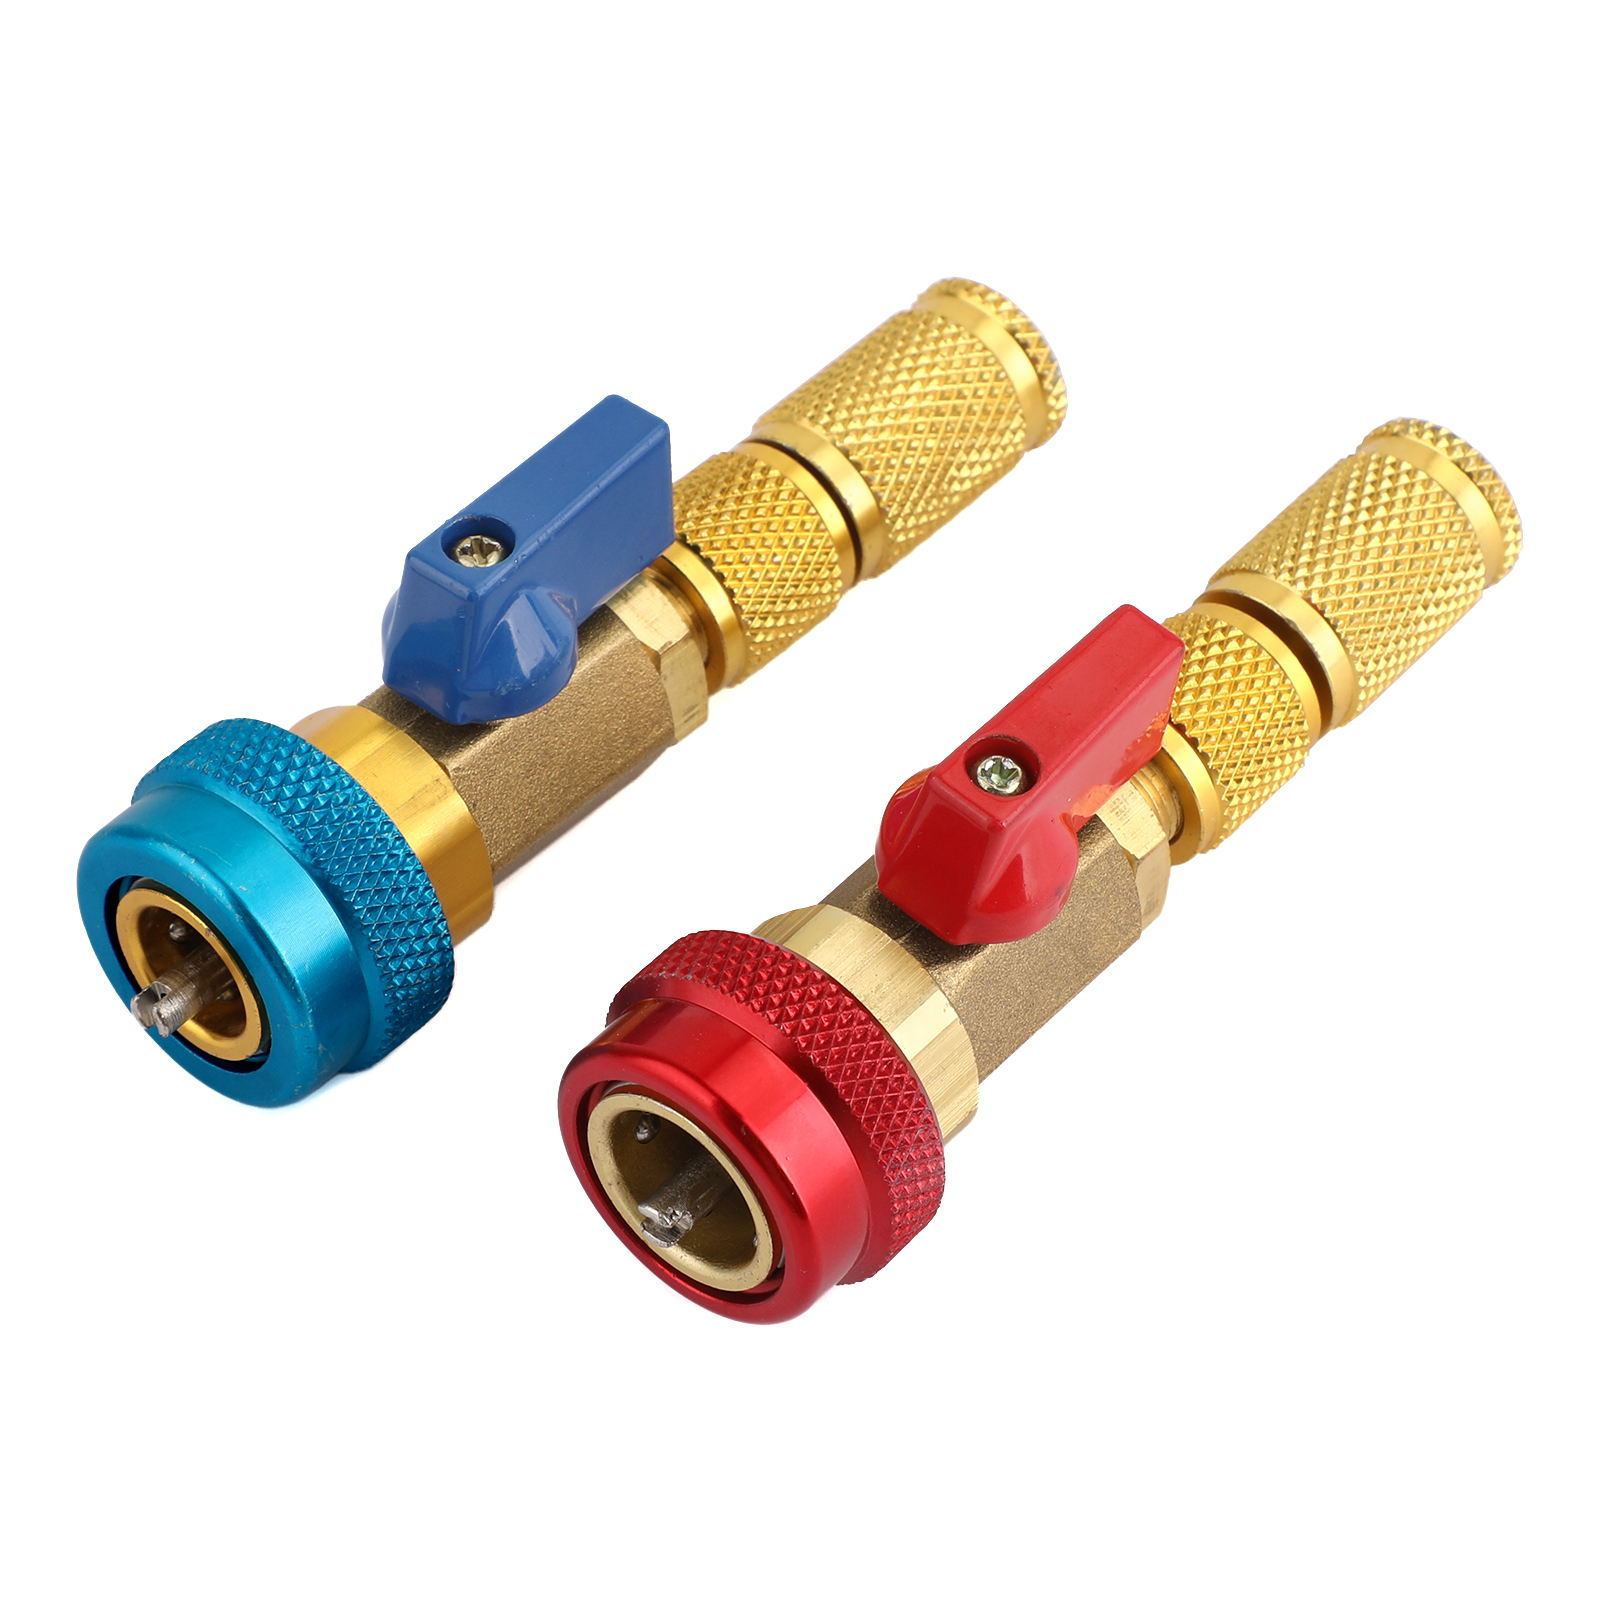 ac valve core removal tool